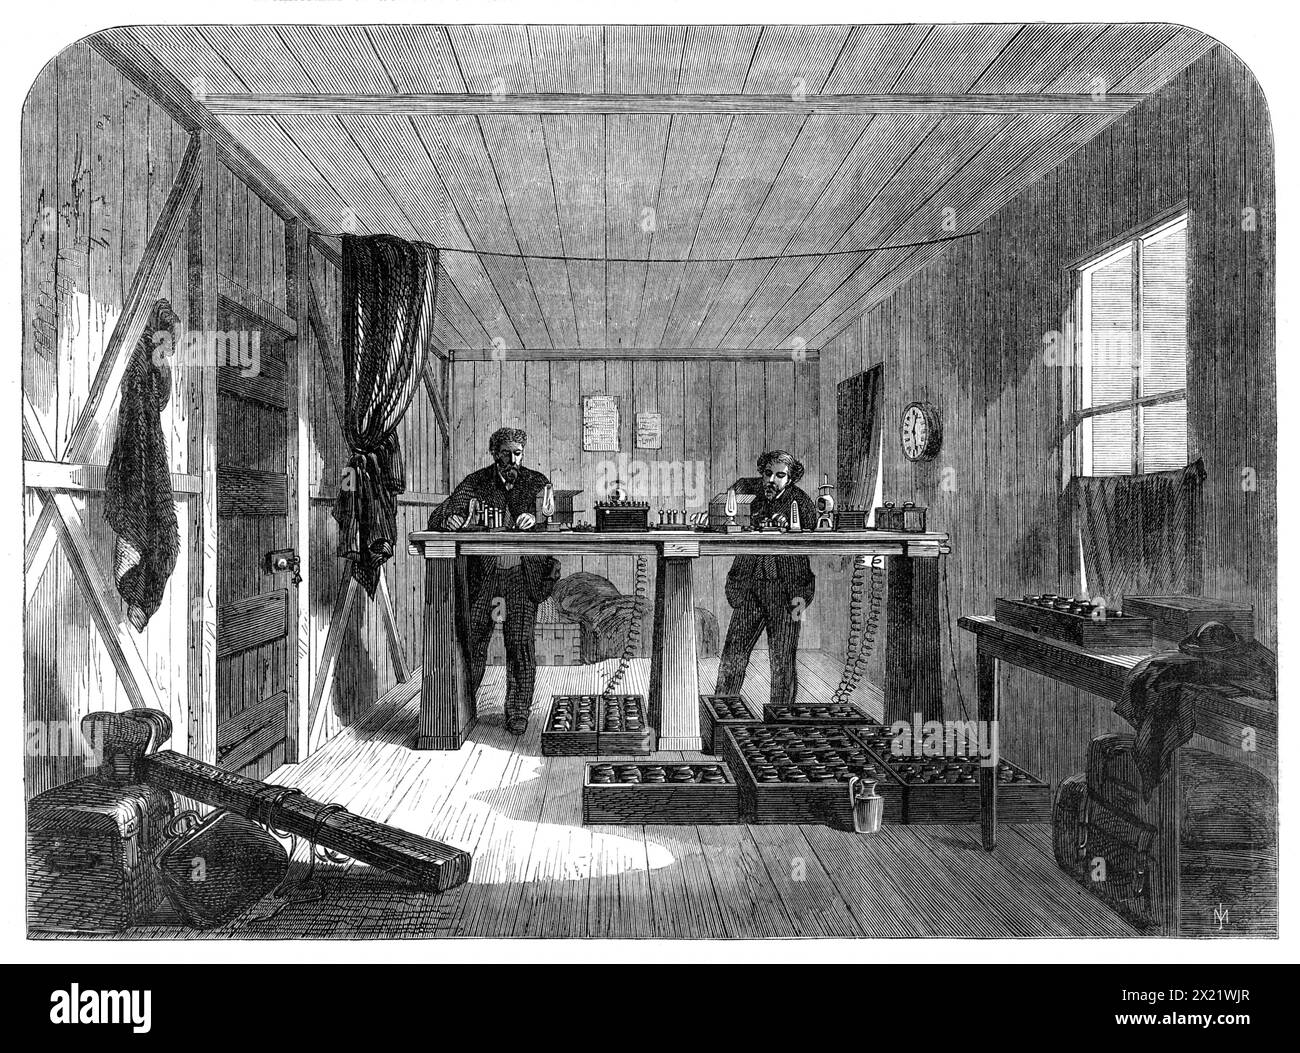 Laying of the Atlantic Telegraph Cable: receiving messages from the Great Eastern in the instrument-room of the Telegraph House at Foilhommerum, Valencia, 1865. Engraving from a sketch by Robert Dudley showing '...the reception of the telegrams, and the interior of the instrument-room at the station, which will, in fact, remain in a similar state until the whole ocean cable is successfully laid, when the line will be handed over by the Construction and Maintenance Company to the Atlantic Telegraph Company, and the instruments (Professor Thomson's) now used, and which are correctly shown in our Stock Photo